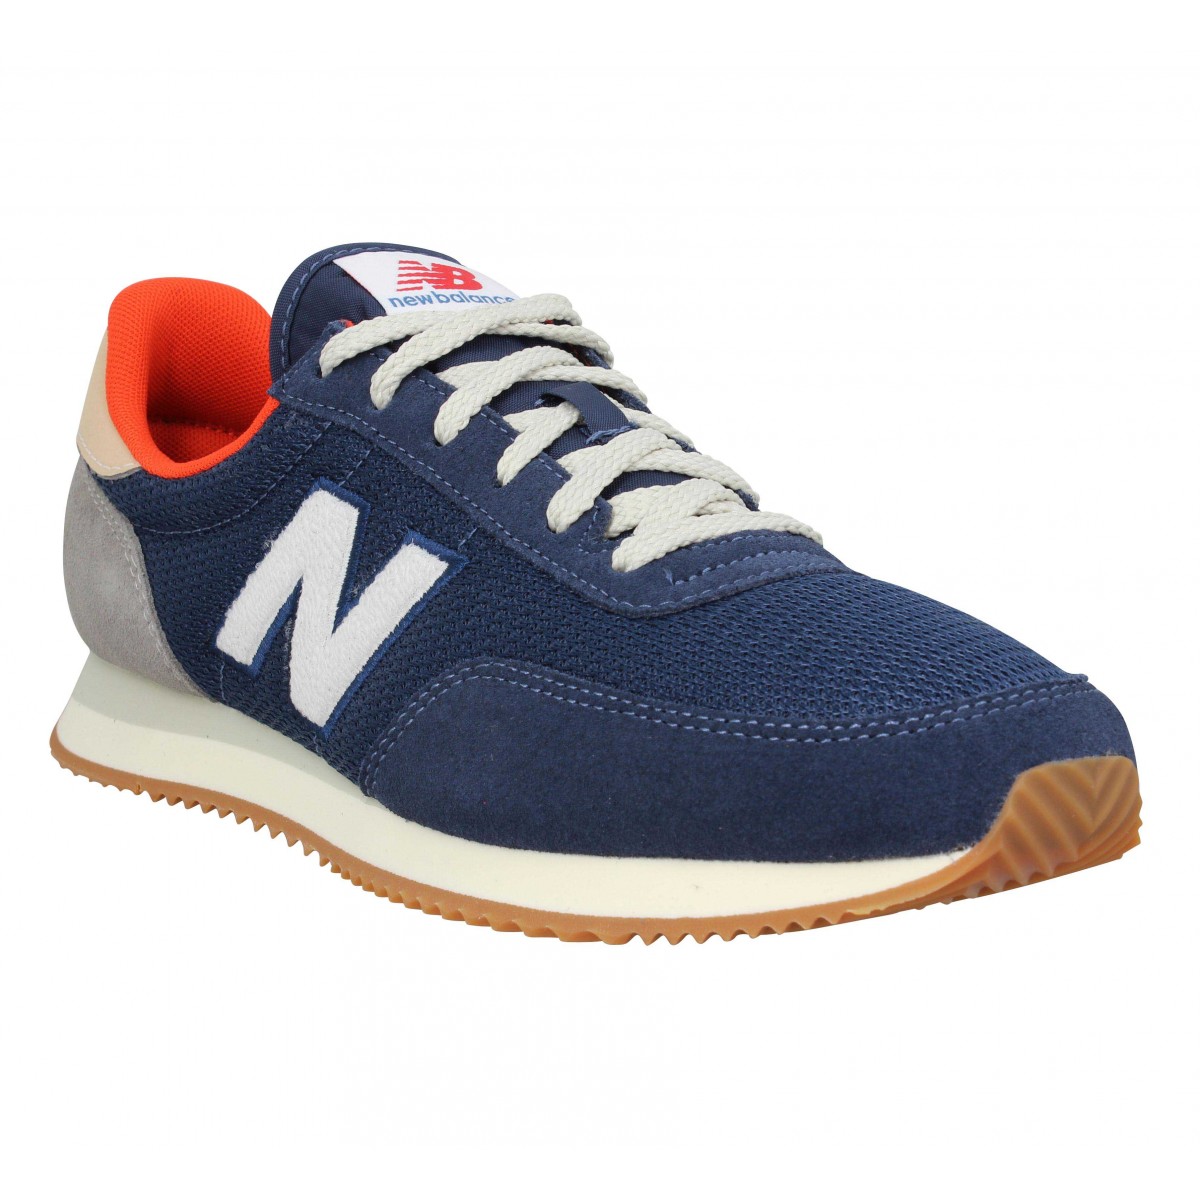 New balance 720 yb velours toile homme marine homme | Fanny chaussures